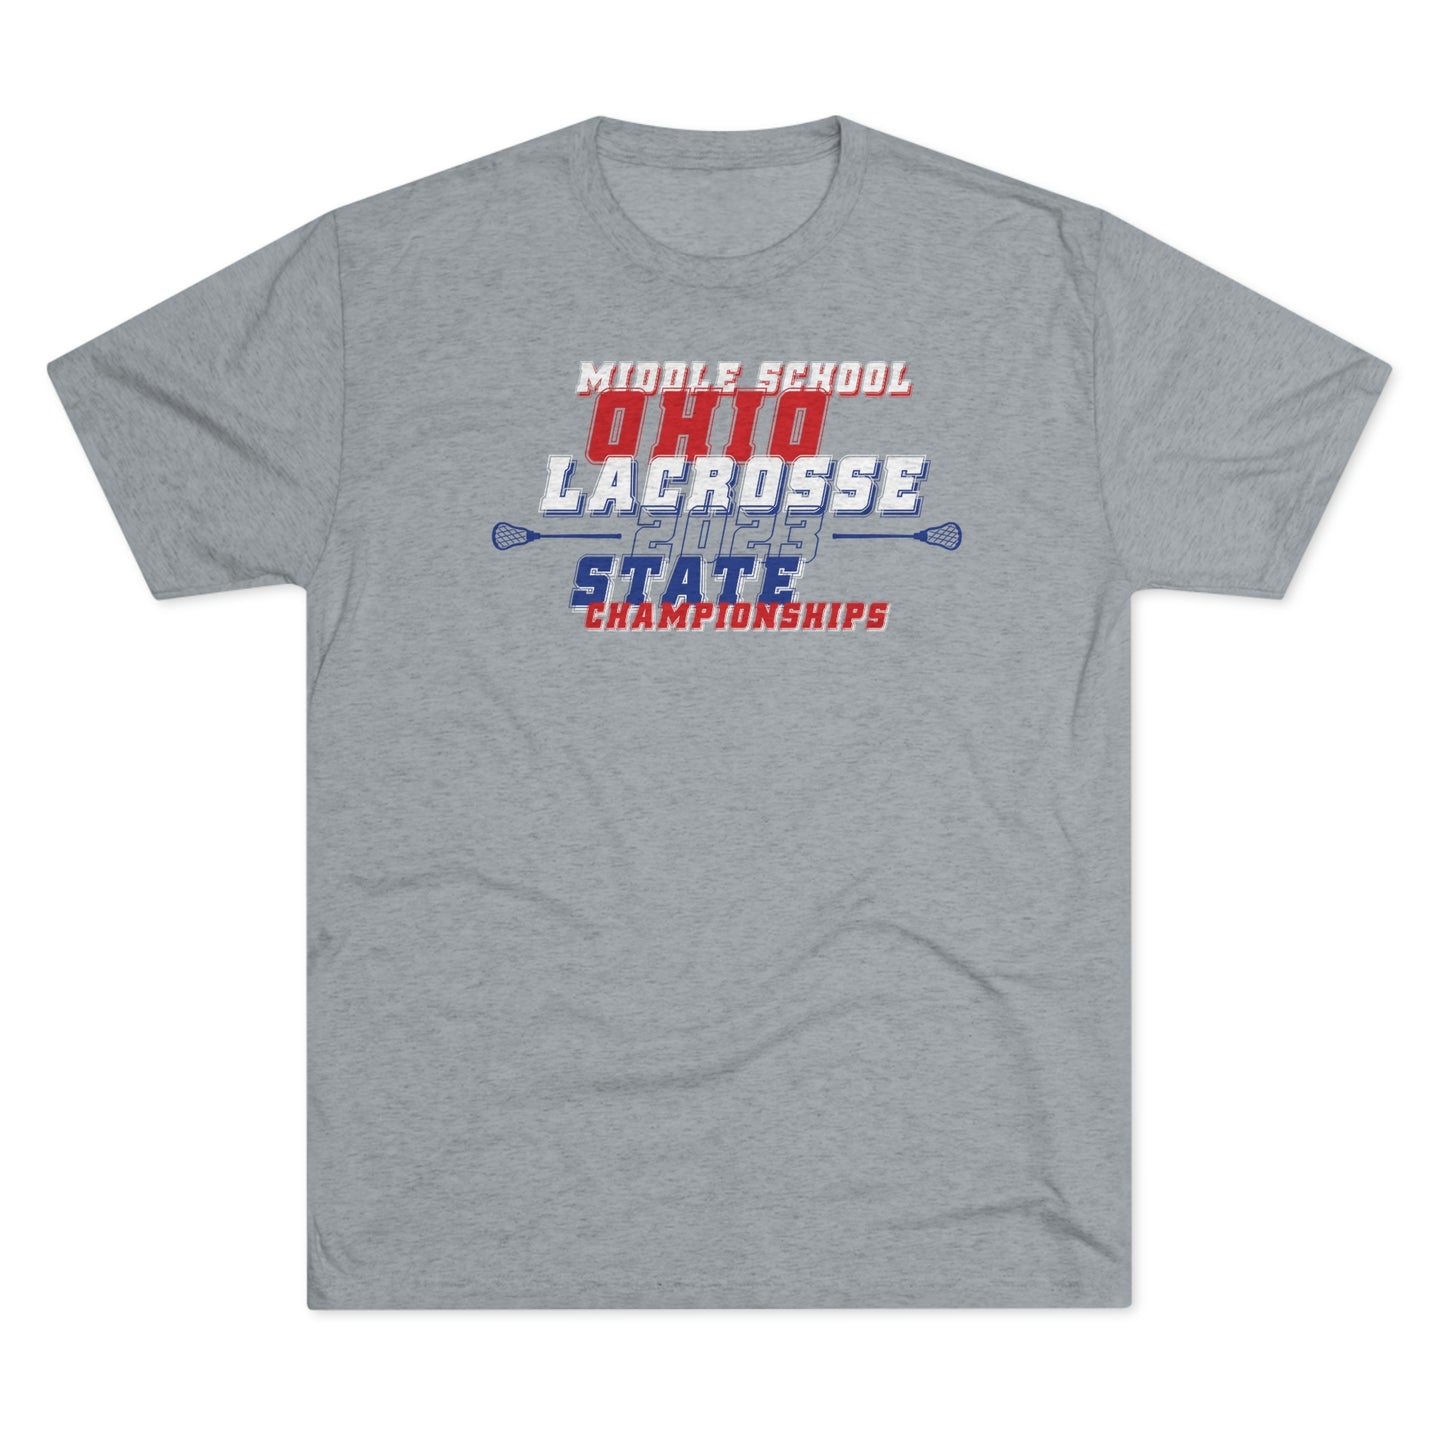 STACKED-OUTLINES_OHIO LACROSSE STATE CHAMPIONSHIPS Unisex Tri-Blend Crew Tee